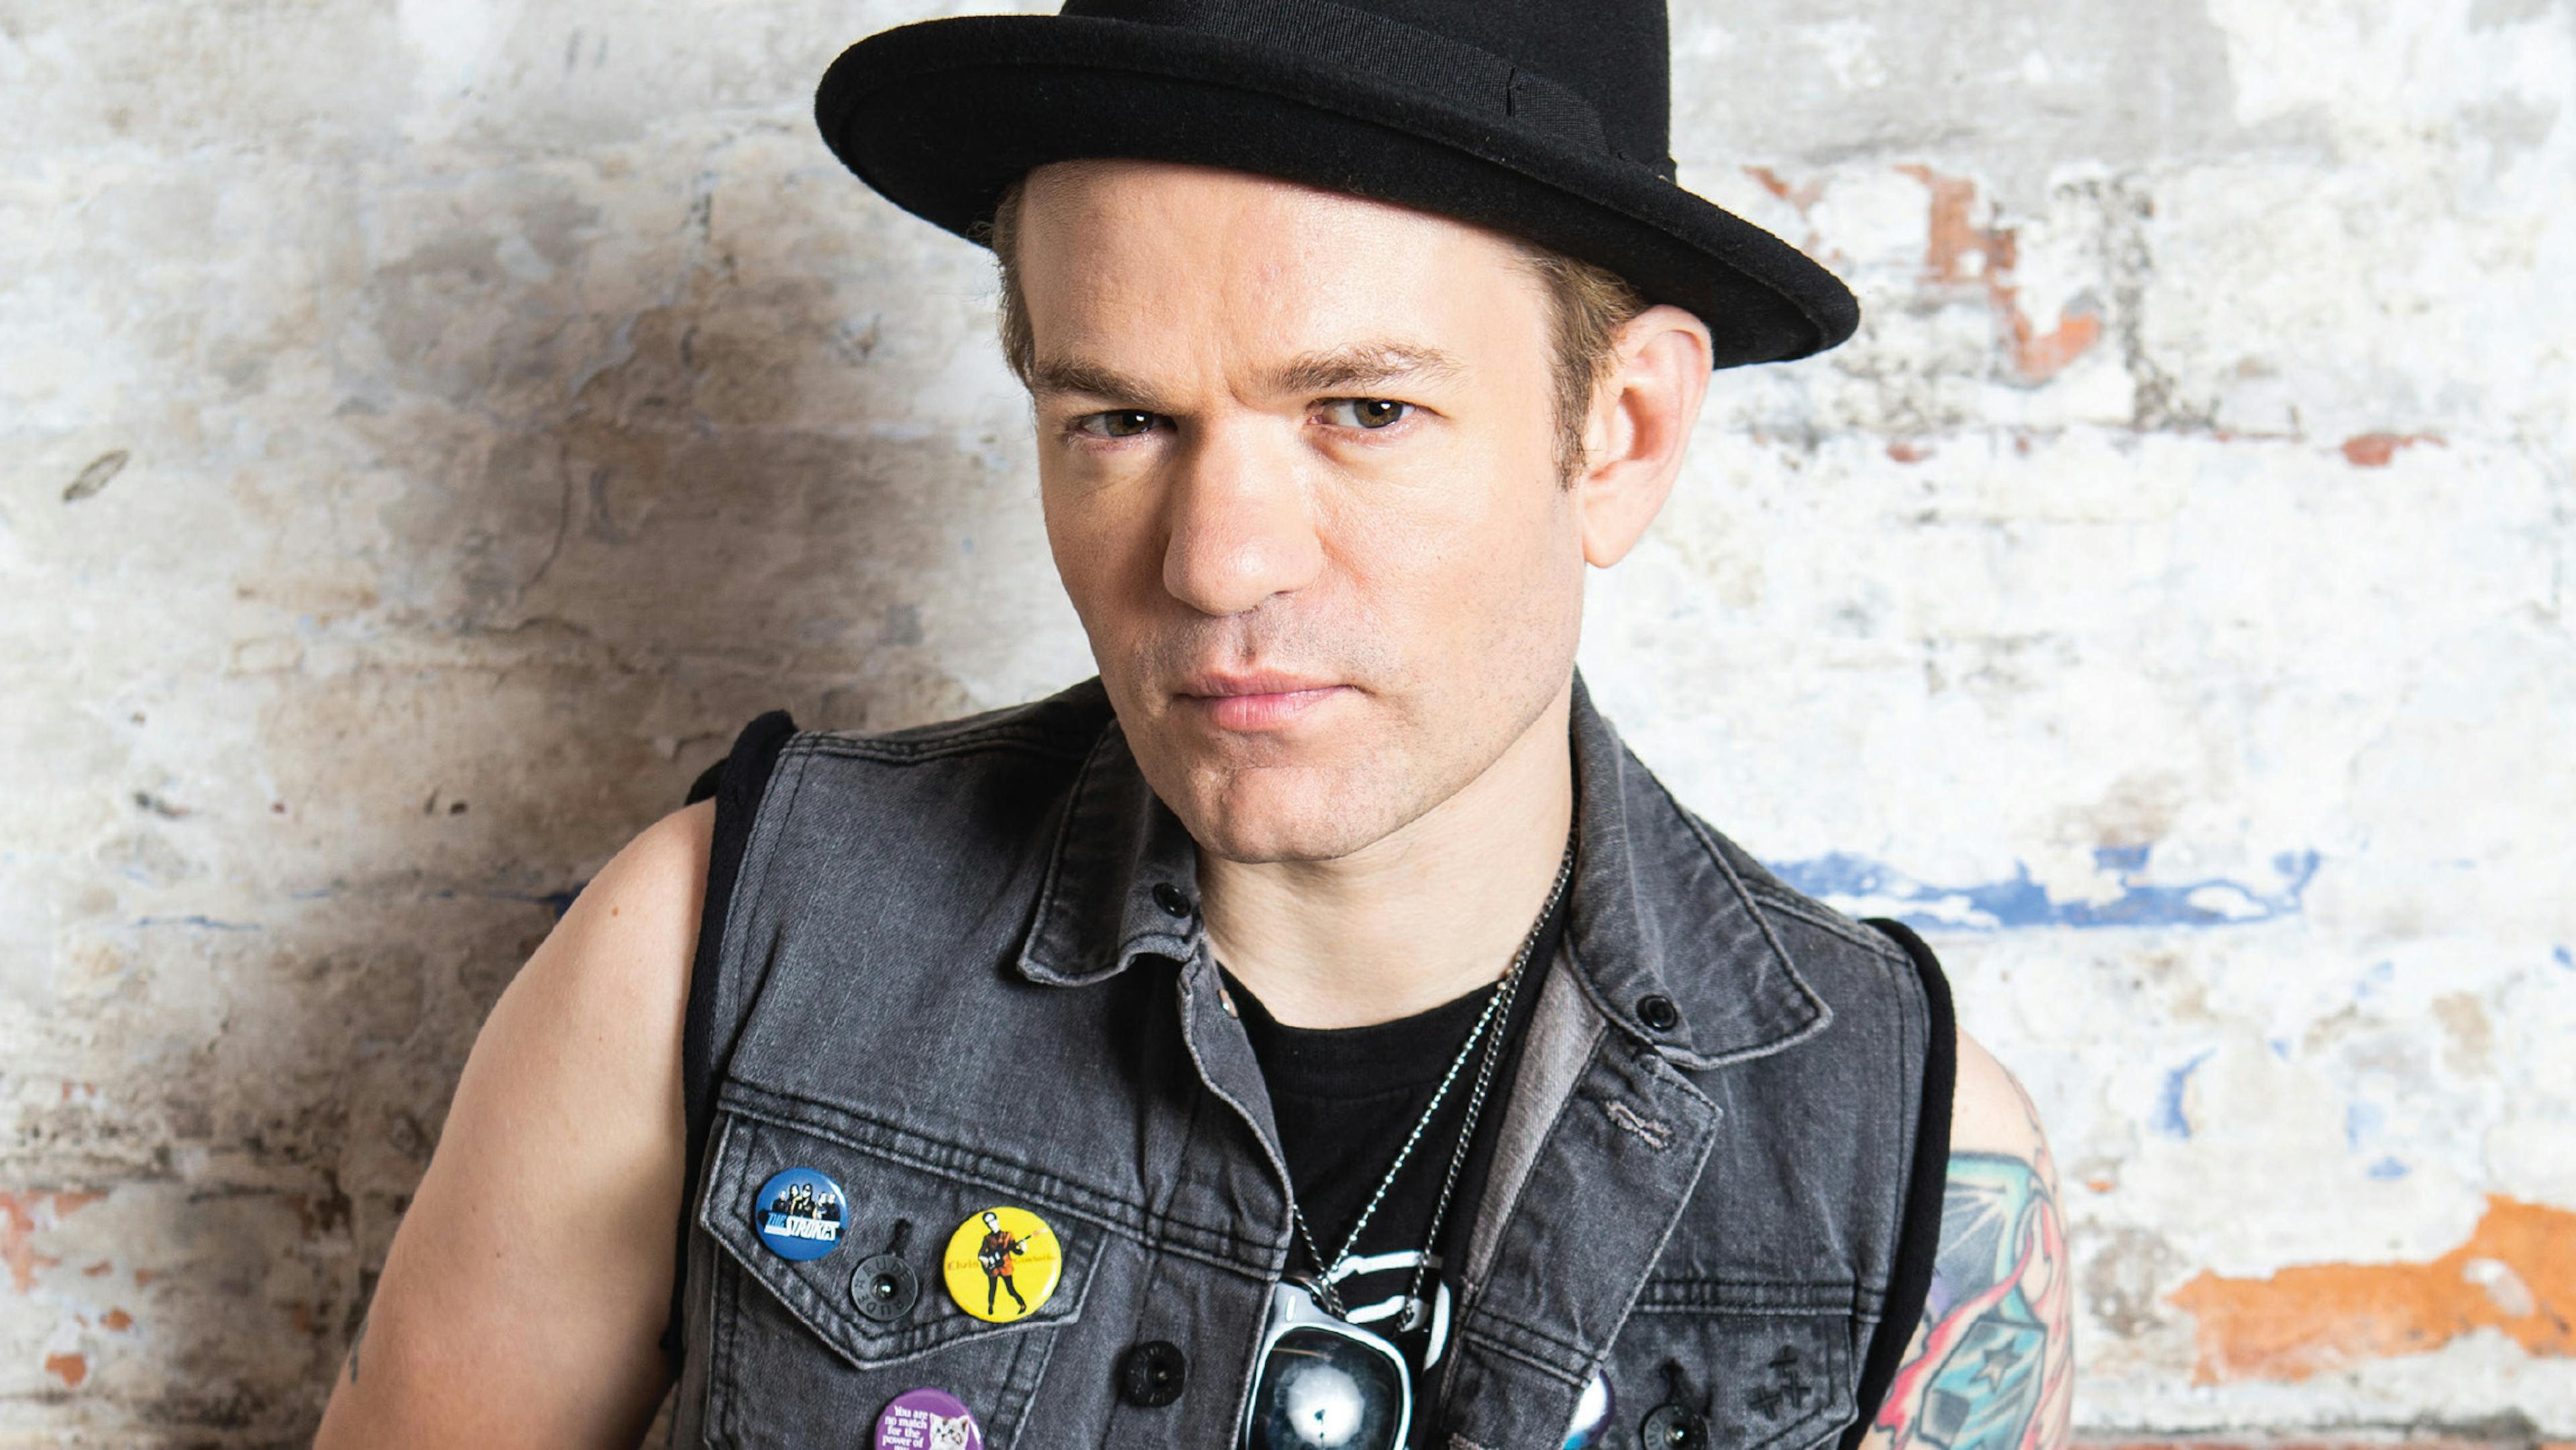 Sum 41’s Deryck Whibley discharged from hospital after being treated for pneumonia